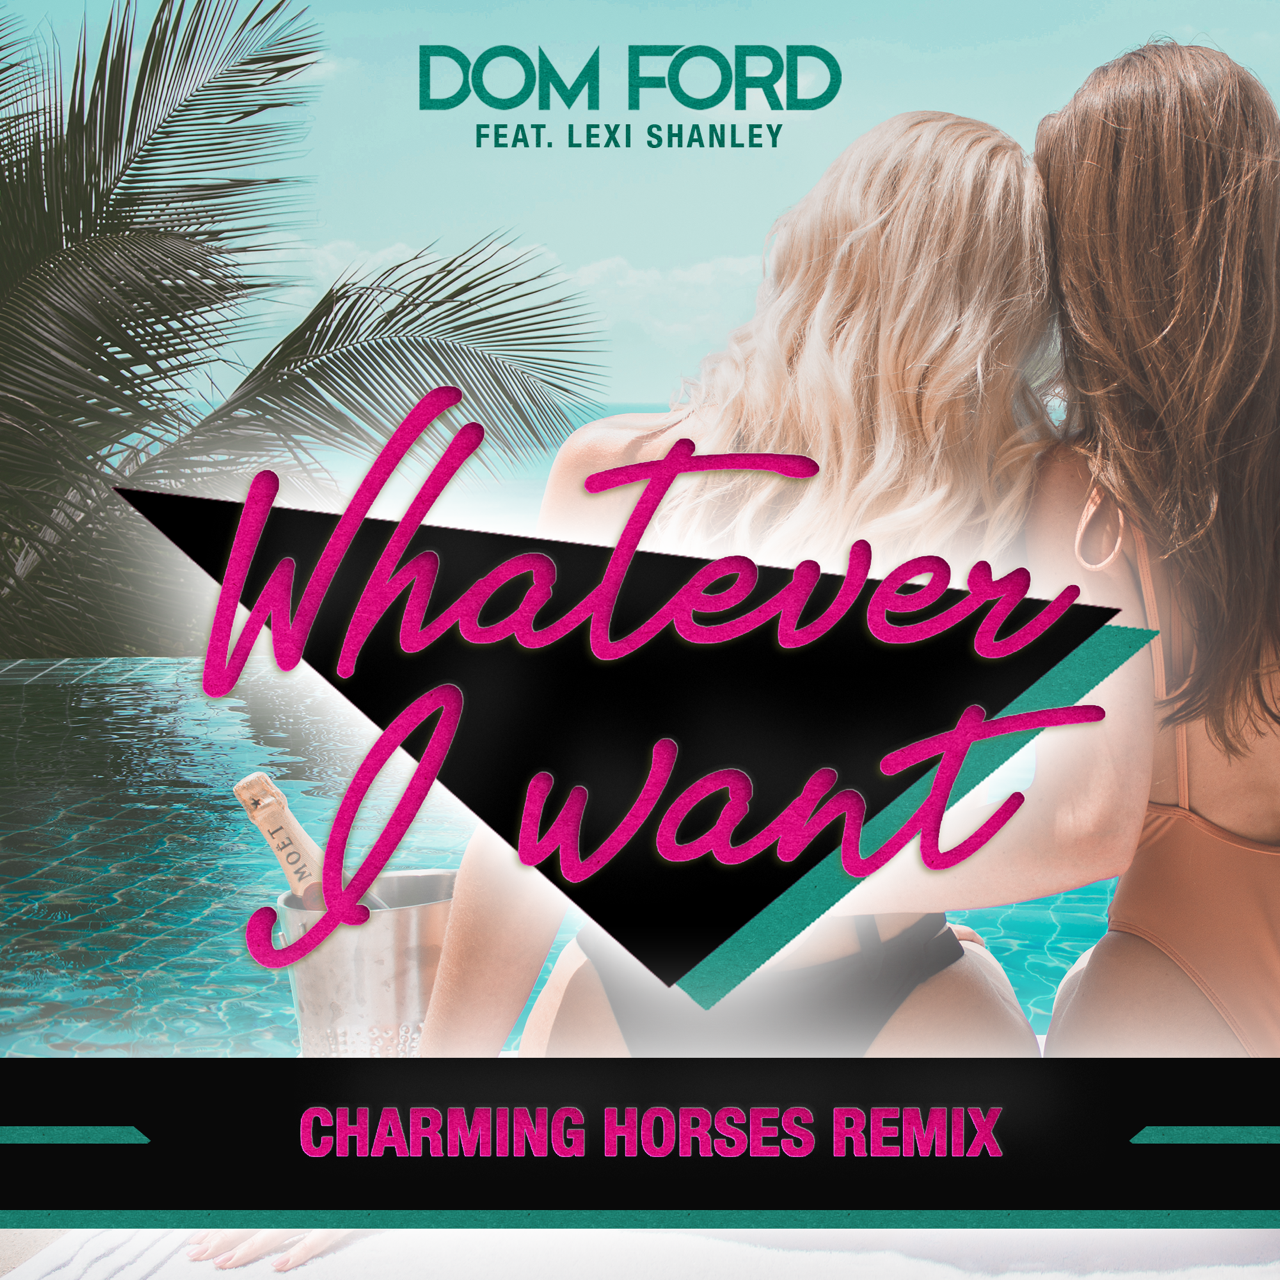 Charming Horses Remixes Dom Ford’s “Whatever I Want” Into a Blazing Dance Hit [Premiere]